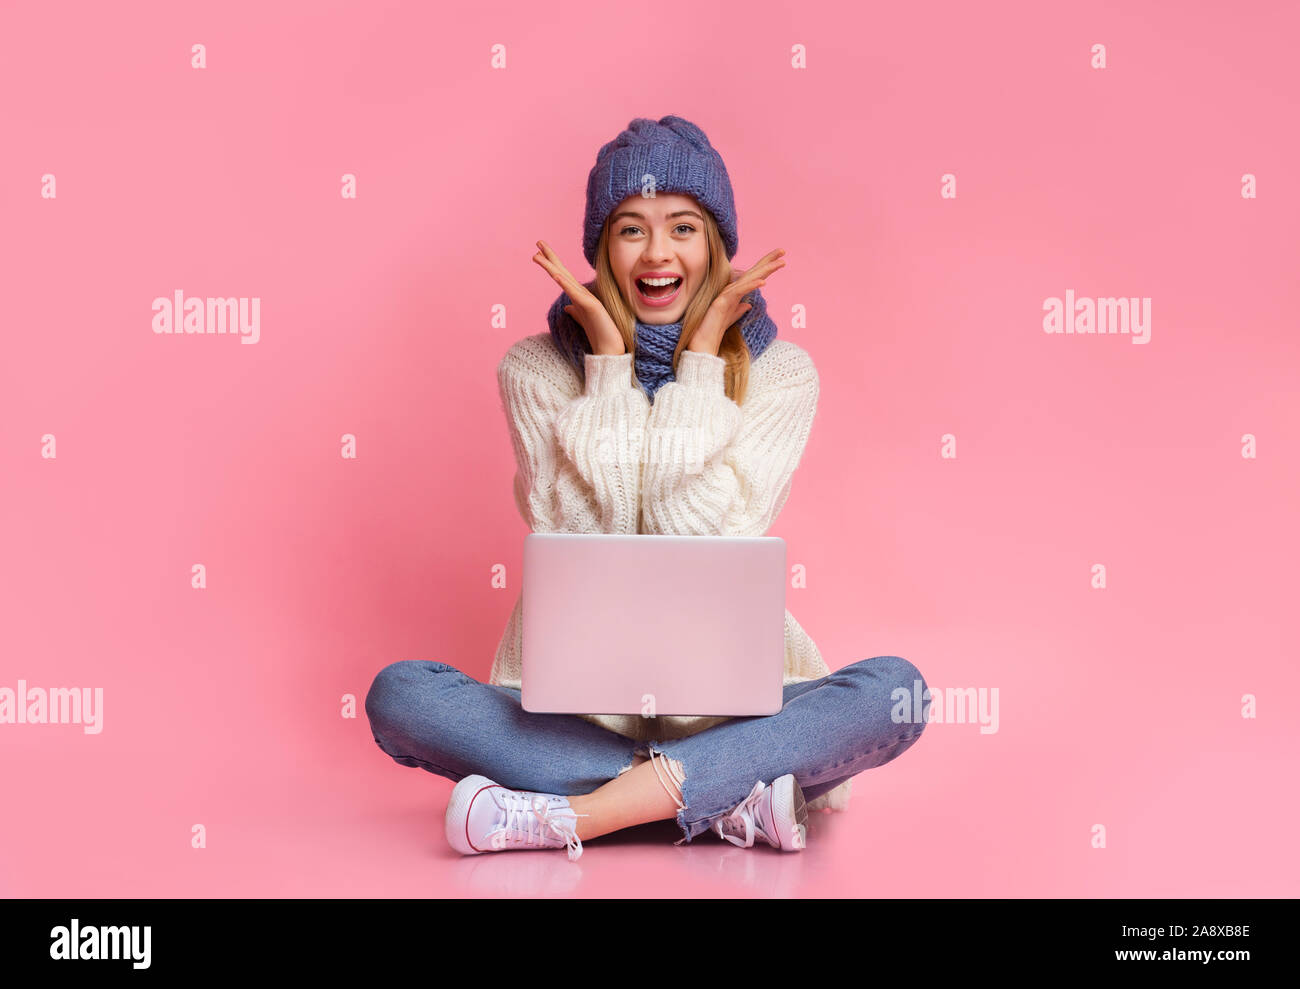 Girl with laptop expressing happiness, big sales online Stock Photo